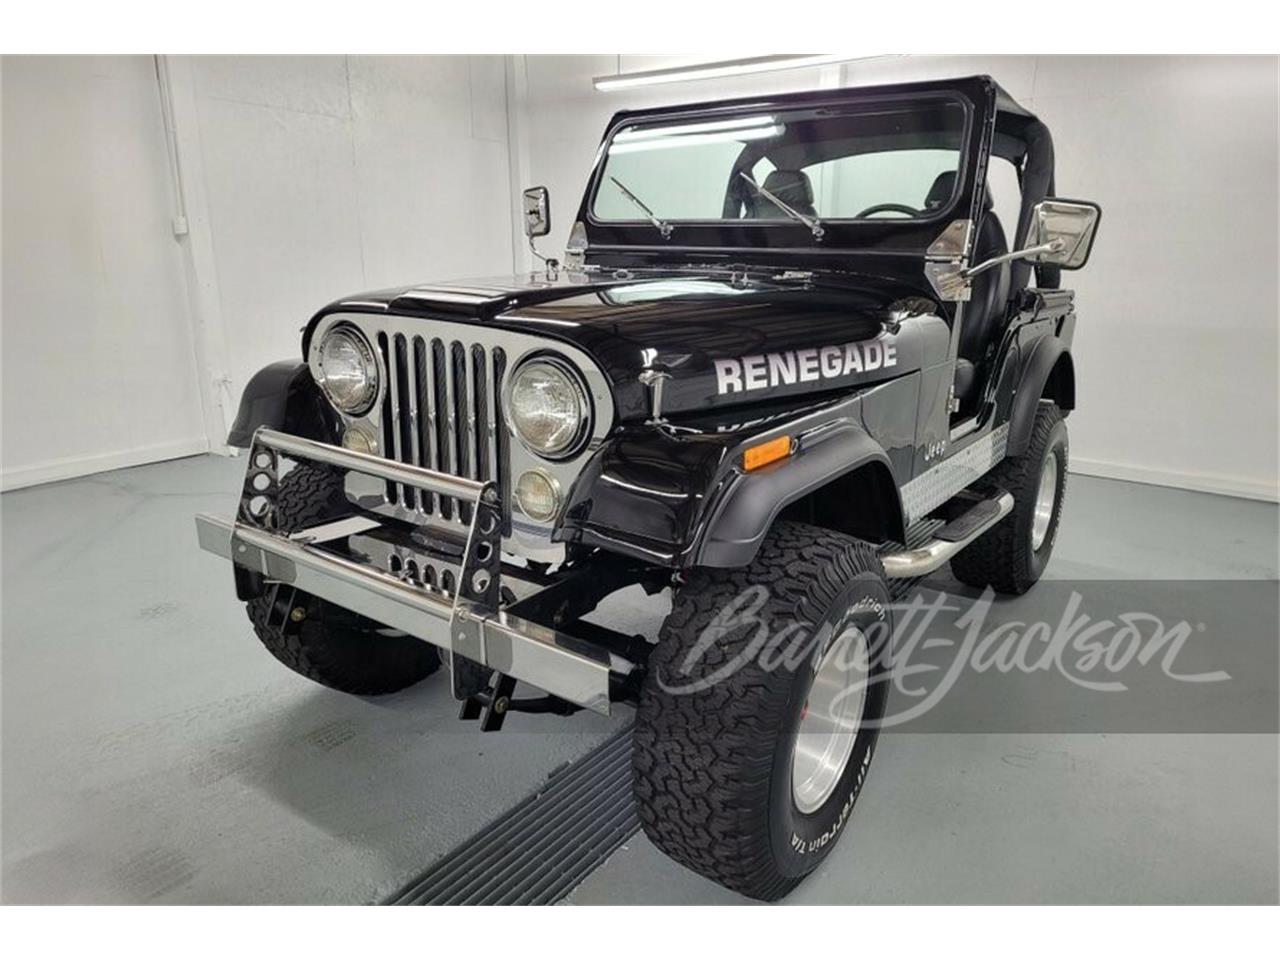 For Sale at Auction: 1976 Jeep CJ5 in Scottsdale, Arizona for sale in Scottsdale, AZ